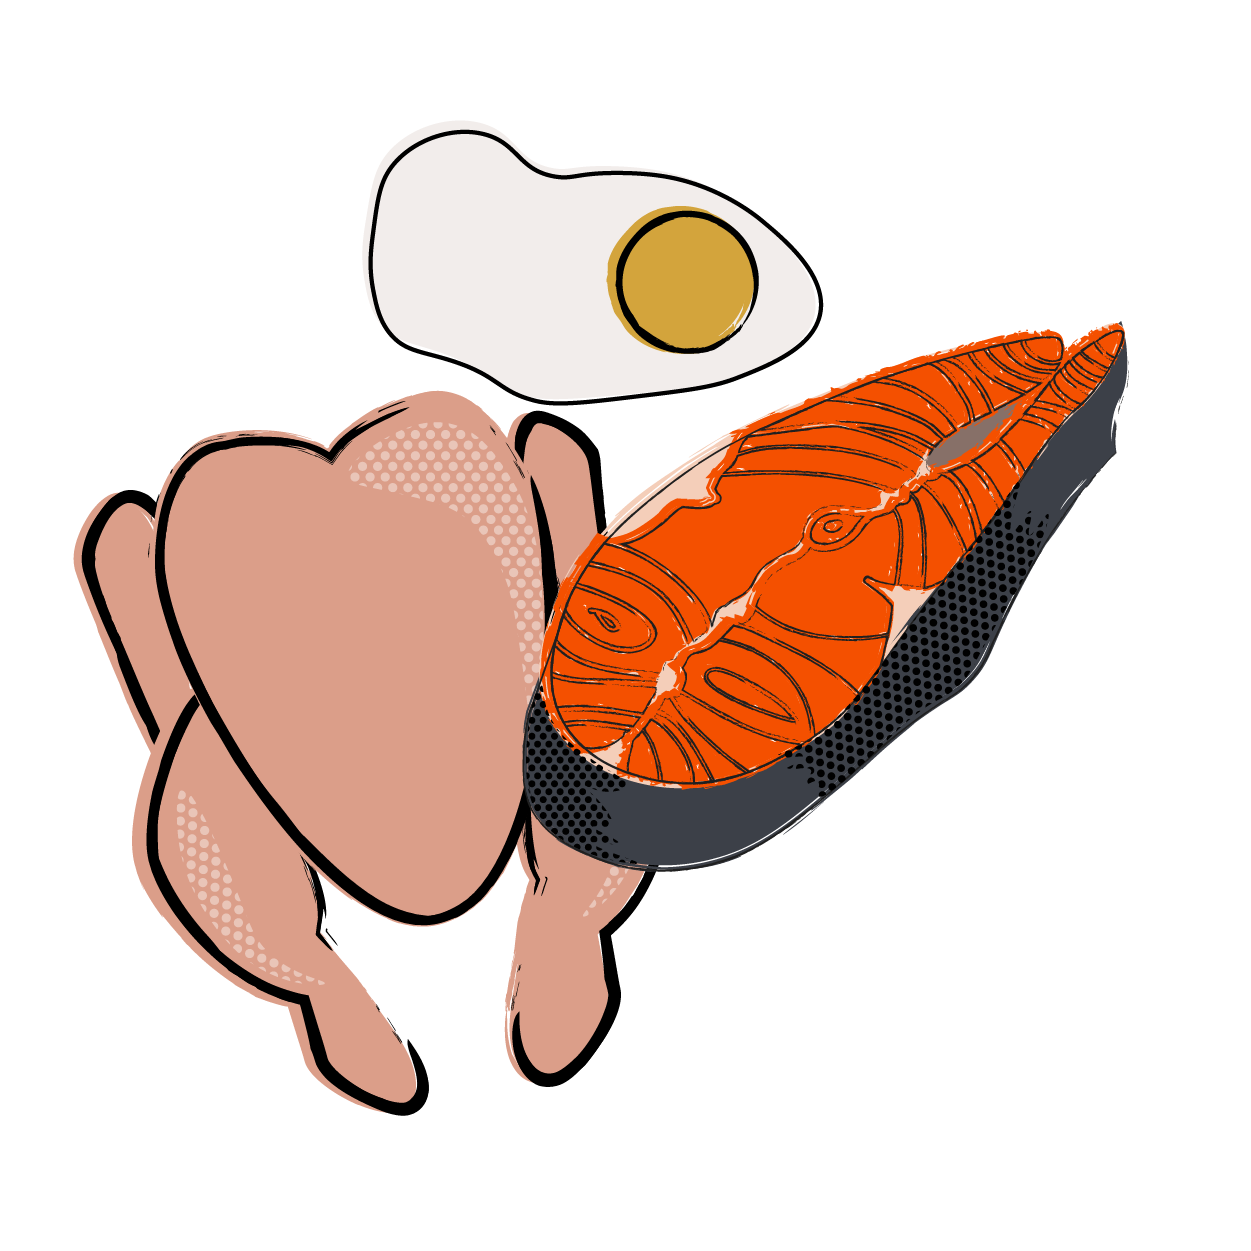 medicus icons _animal proteins (salmon, chicken, egg)